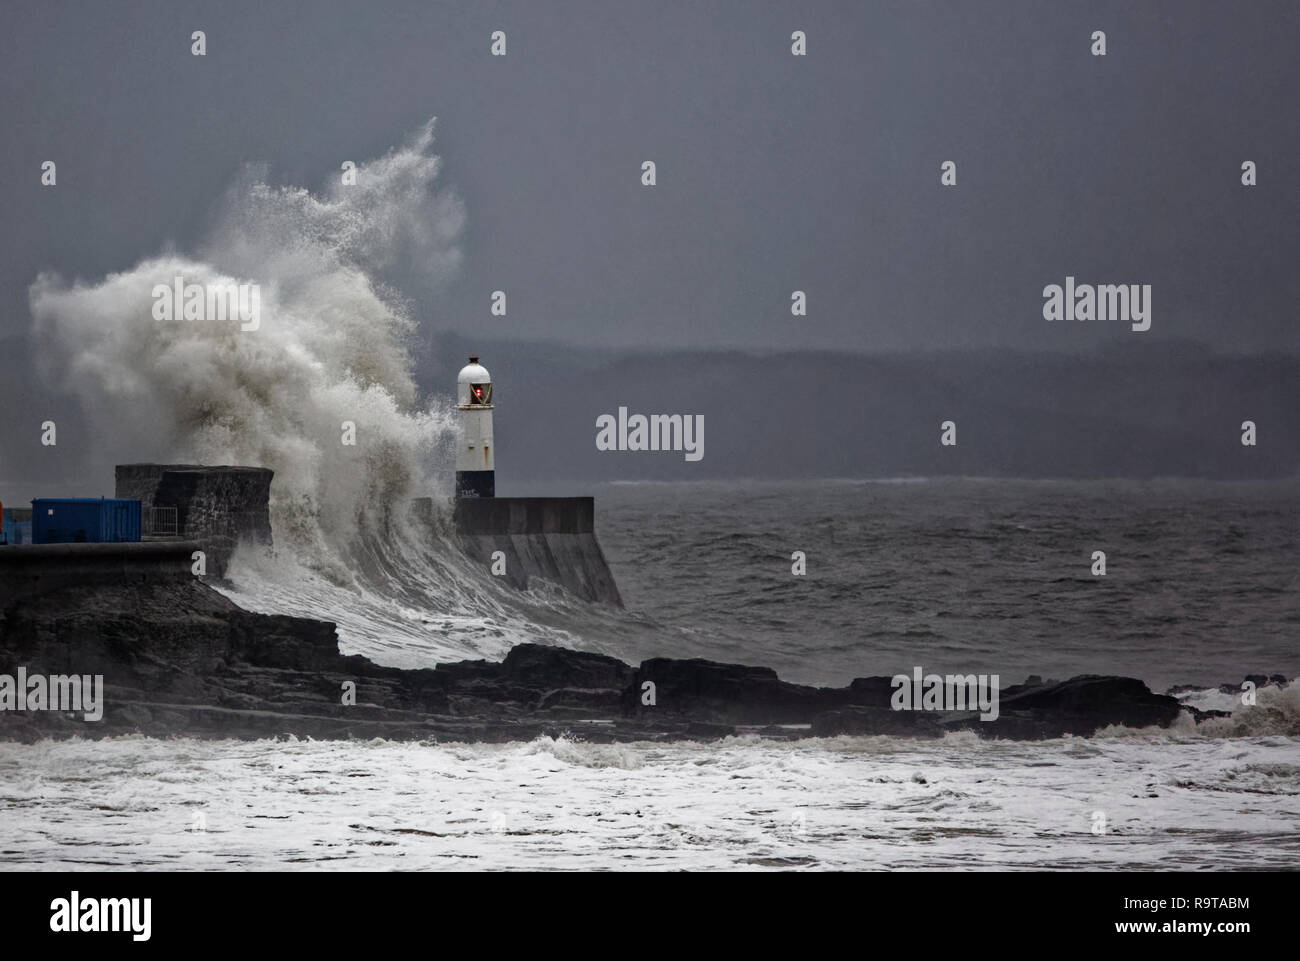 WEATHER PICTURE WALES Pictured: Waves crash against the promenade wall by the lighthouse in Porthcawl, south Wales, UK. Tuesday 18 December 2018 Re: H Stock Photo